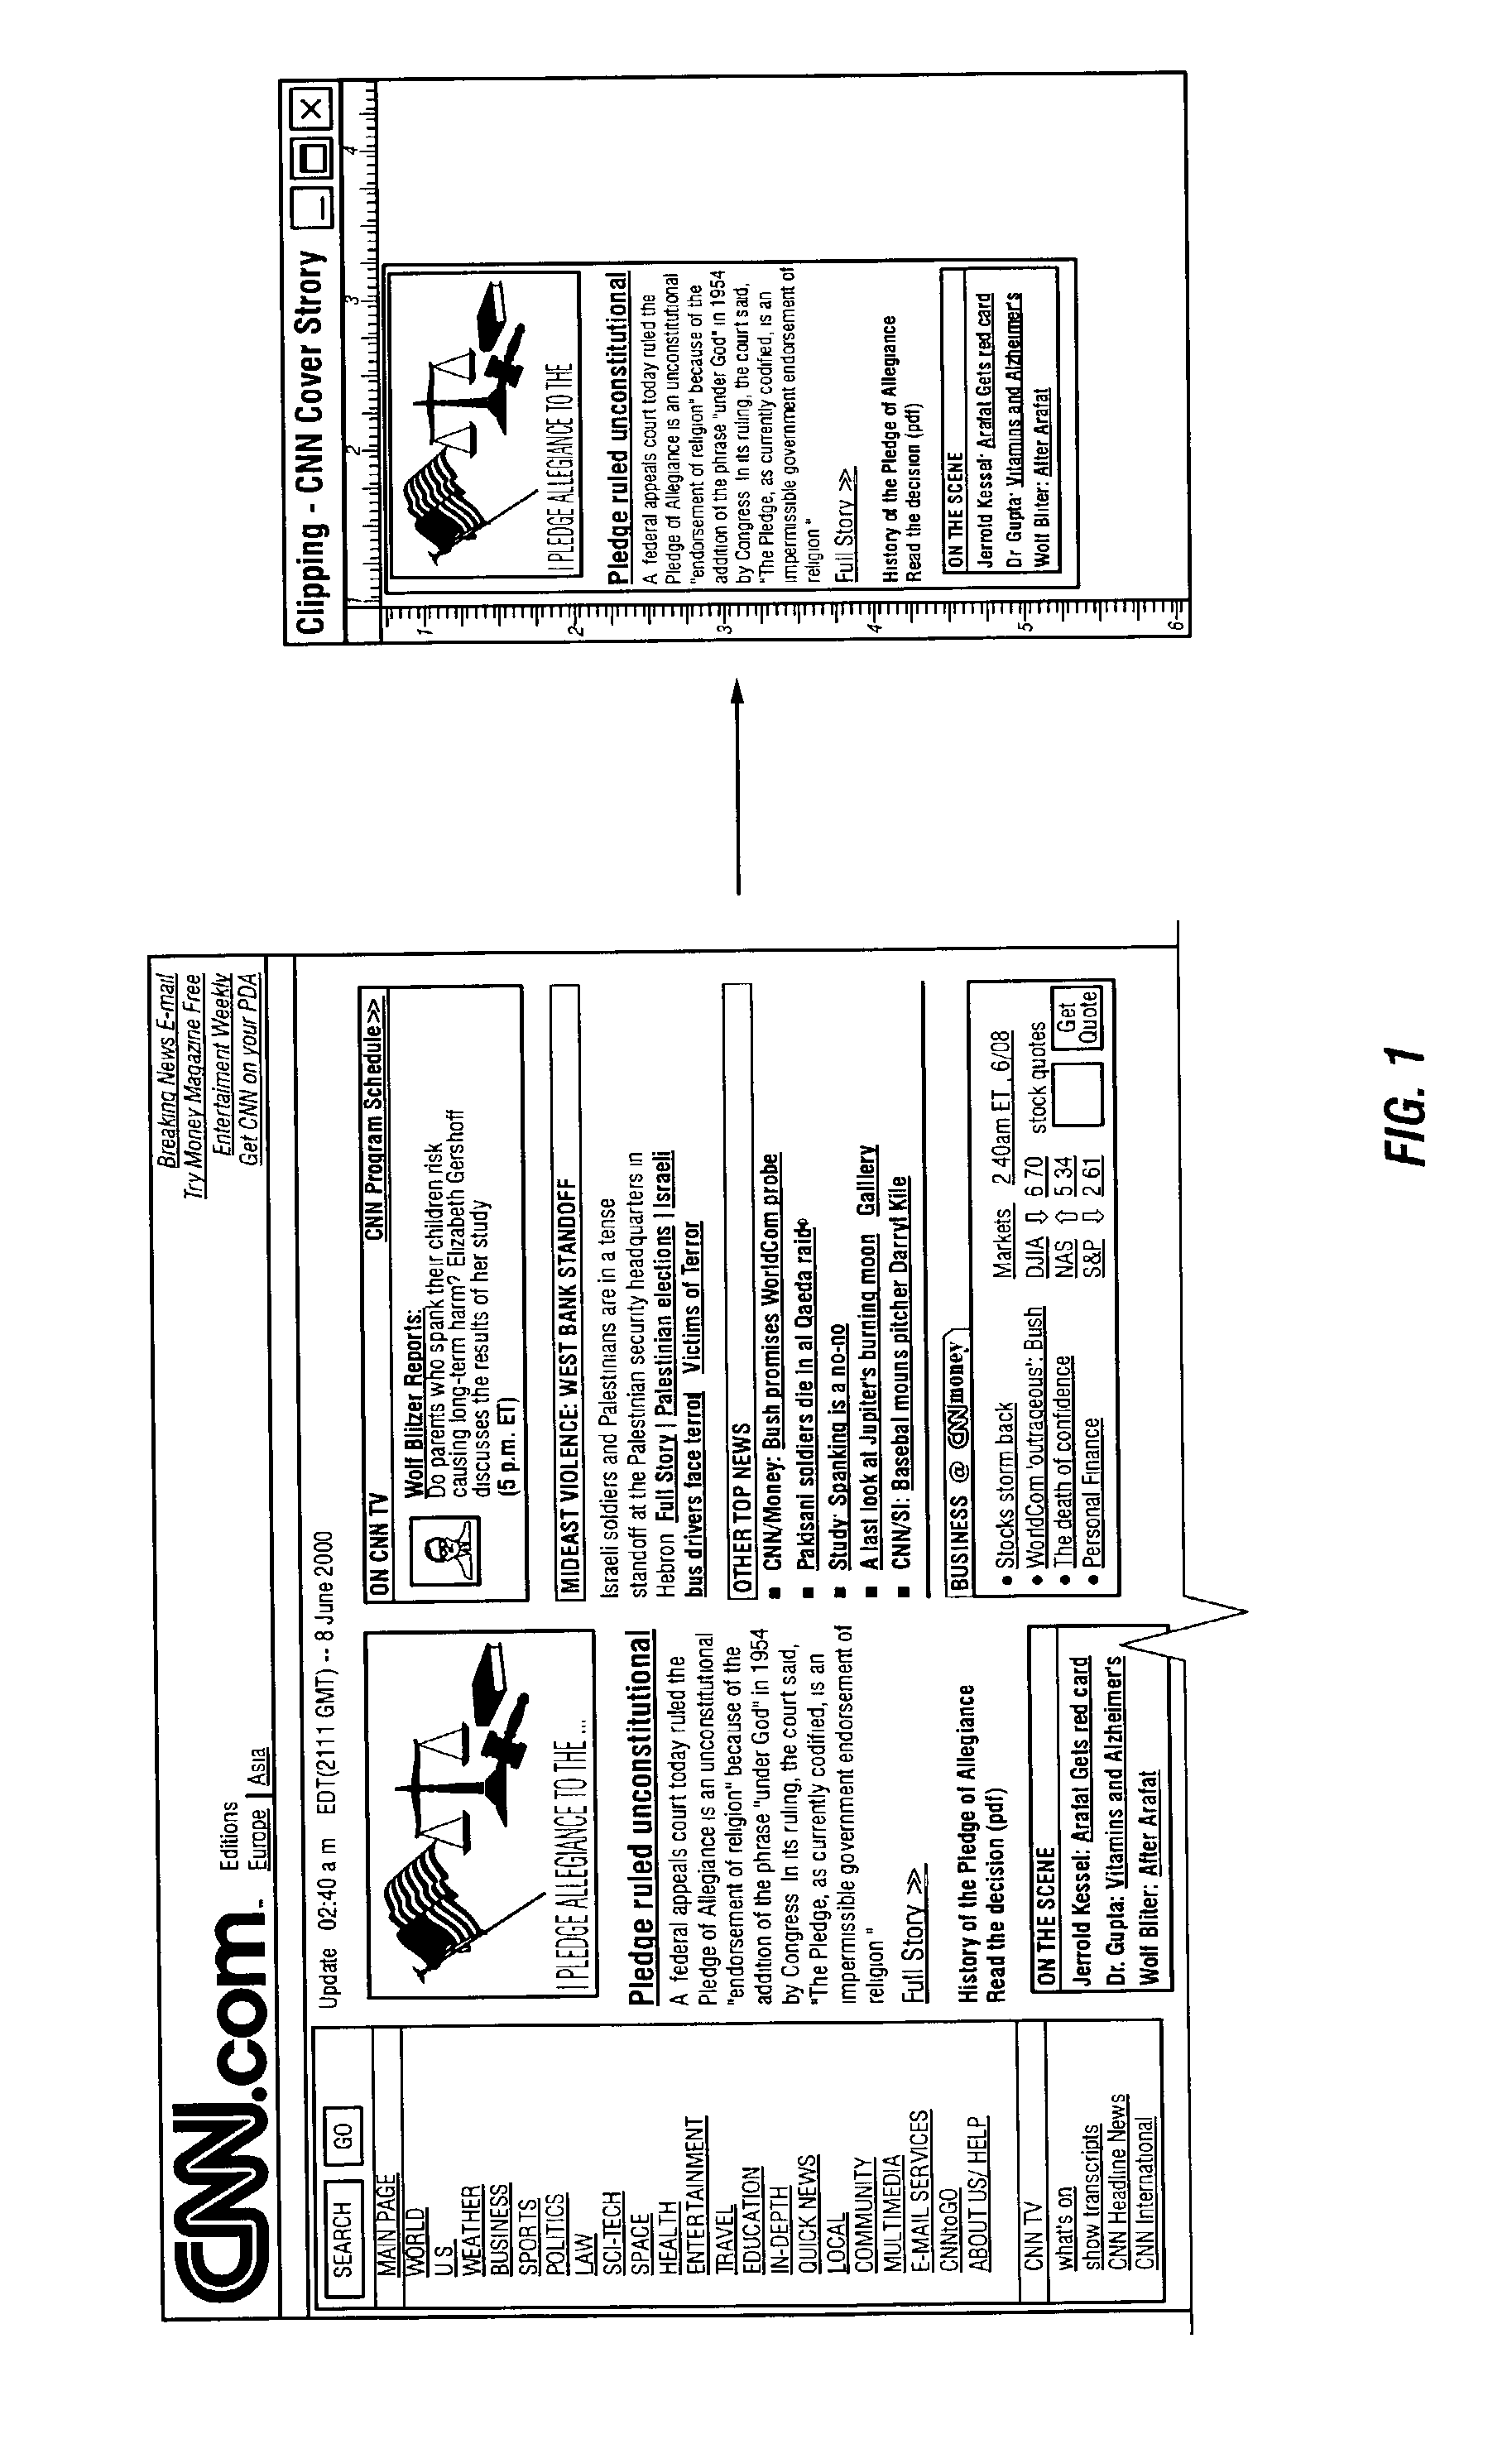 Method and apparatus for extracting relevant data